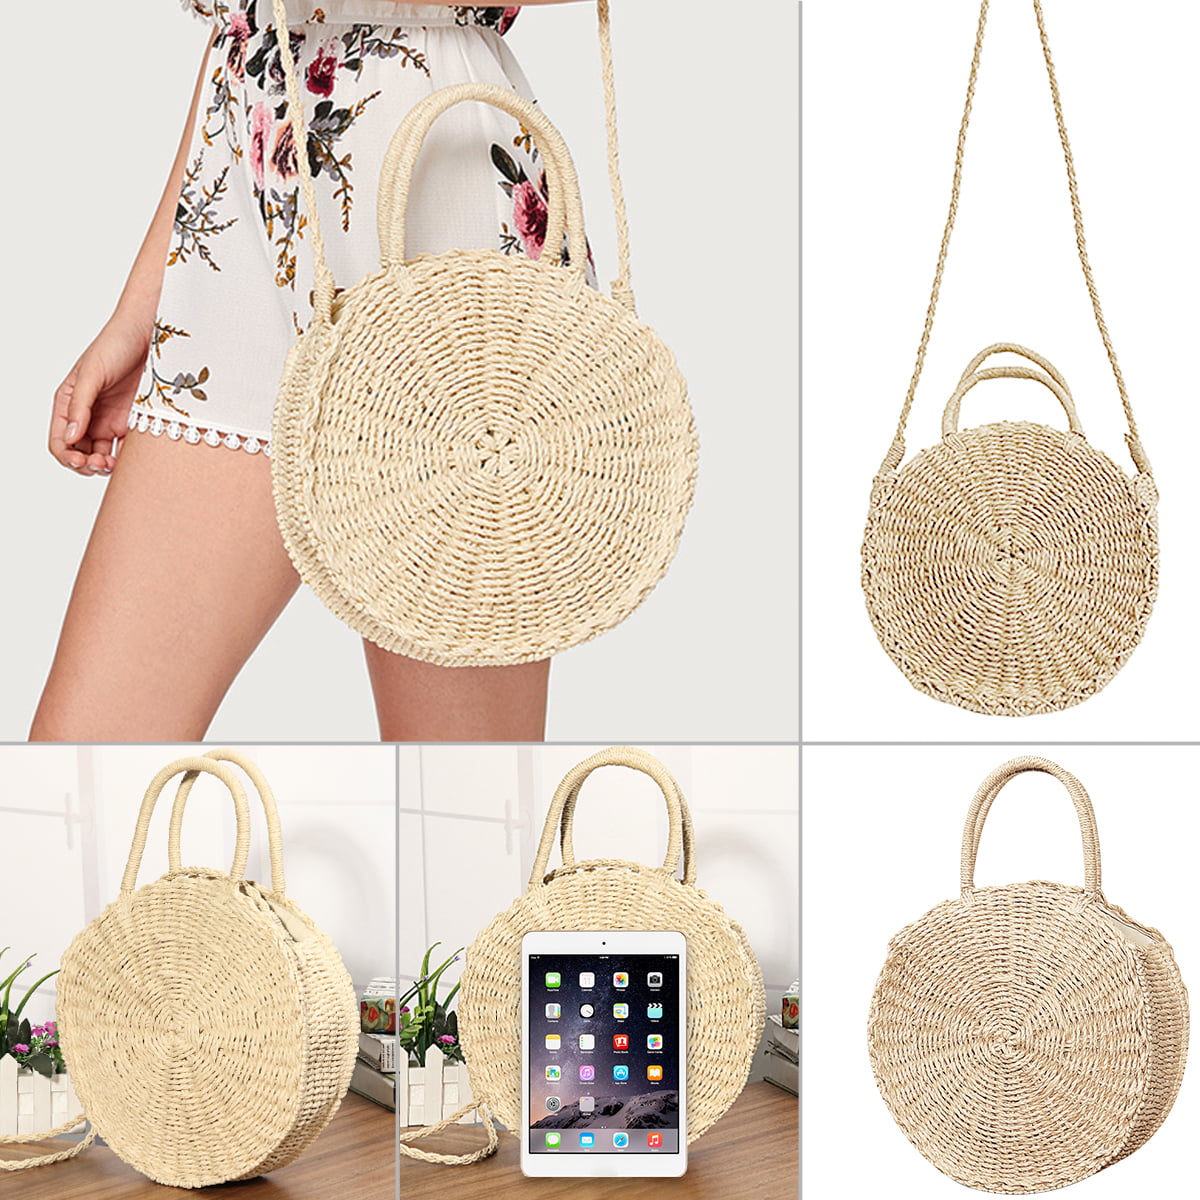 Round Straw Bag for Women Ladies Handmade Woven Large Tote Crossbody Shoulder Bag Round Summer Beach Handbags and Purse